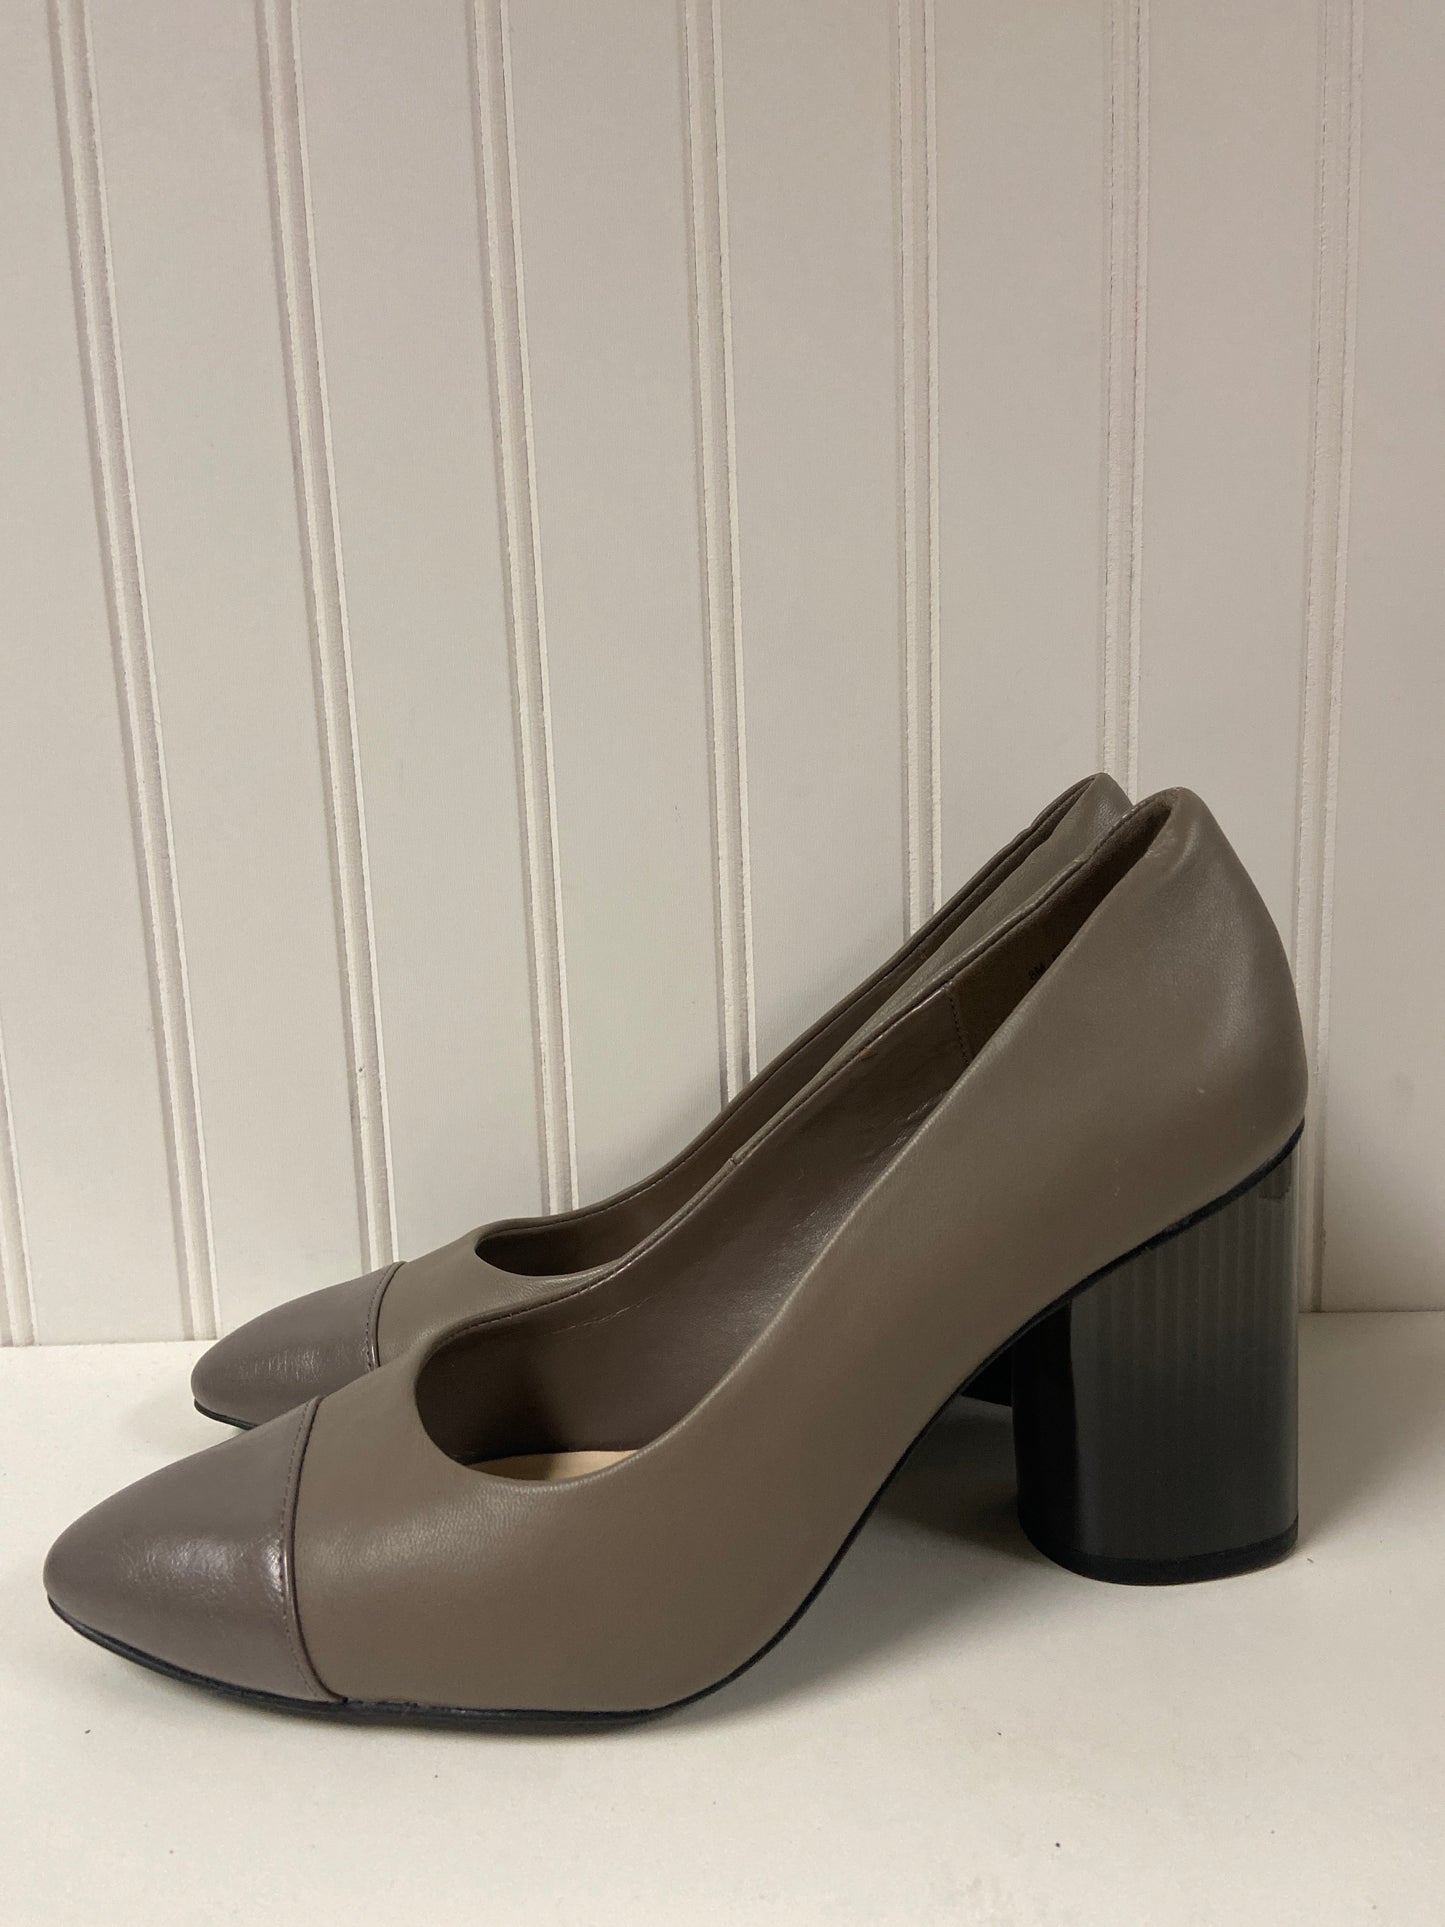 Taupe Shoes Heels Block Nine West, Size 8